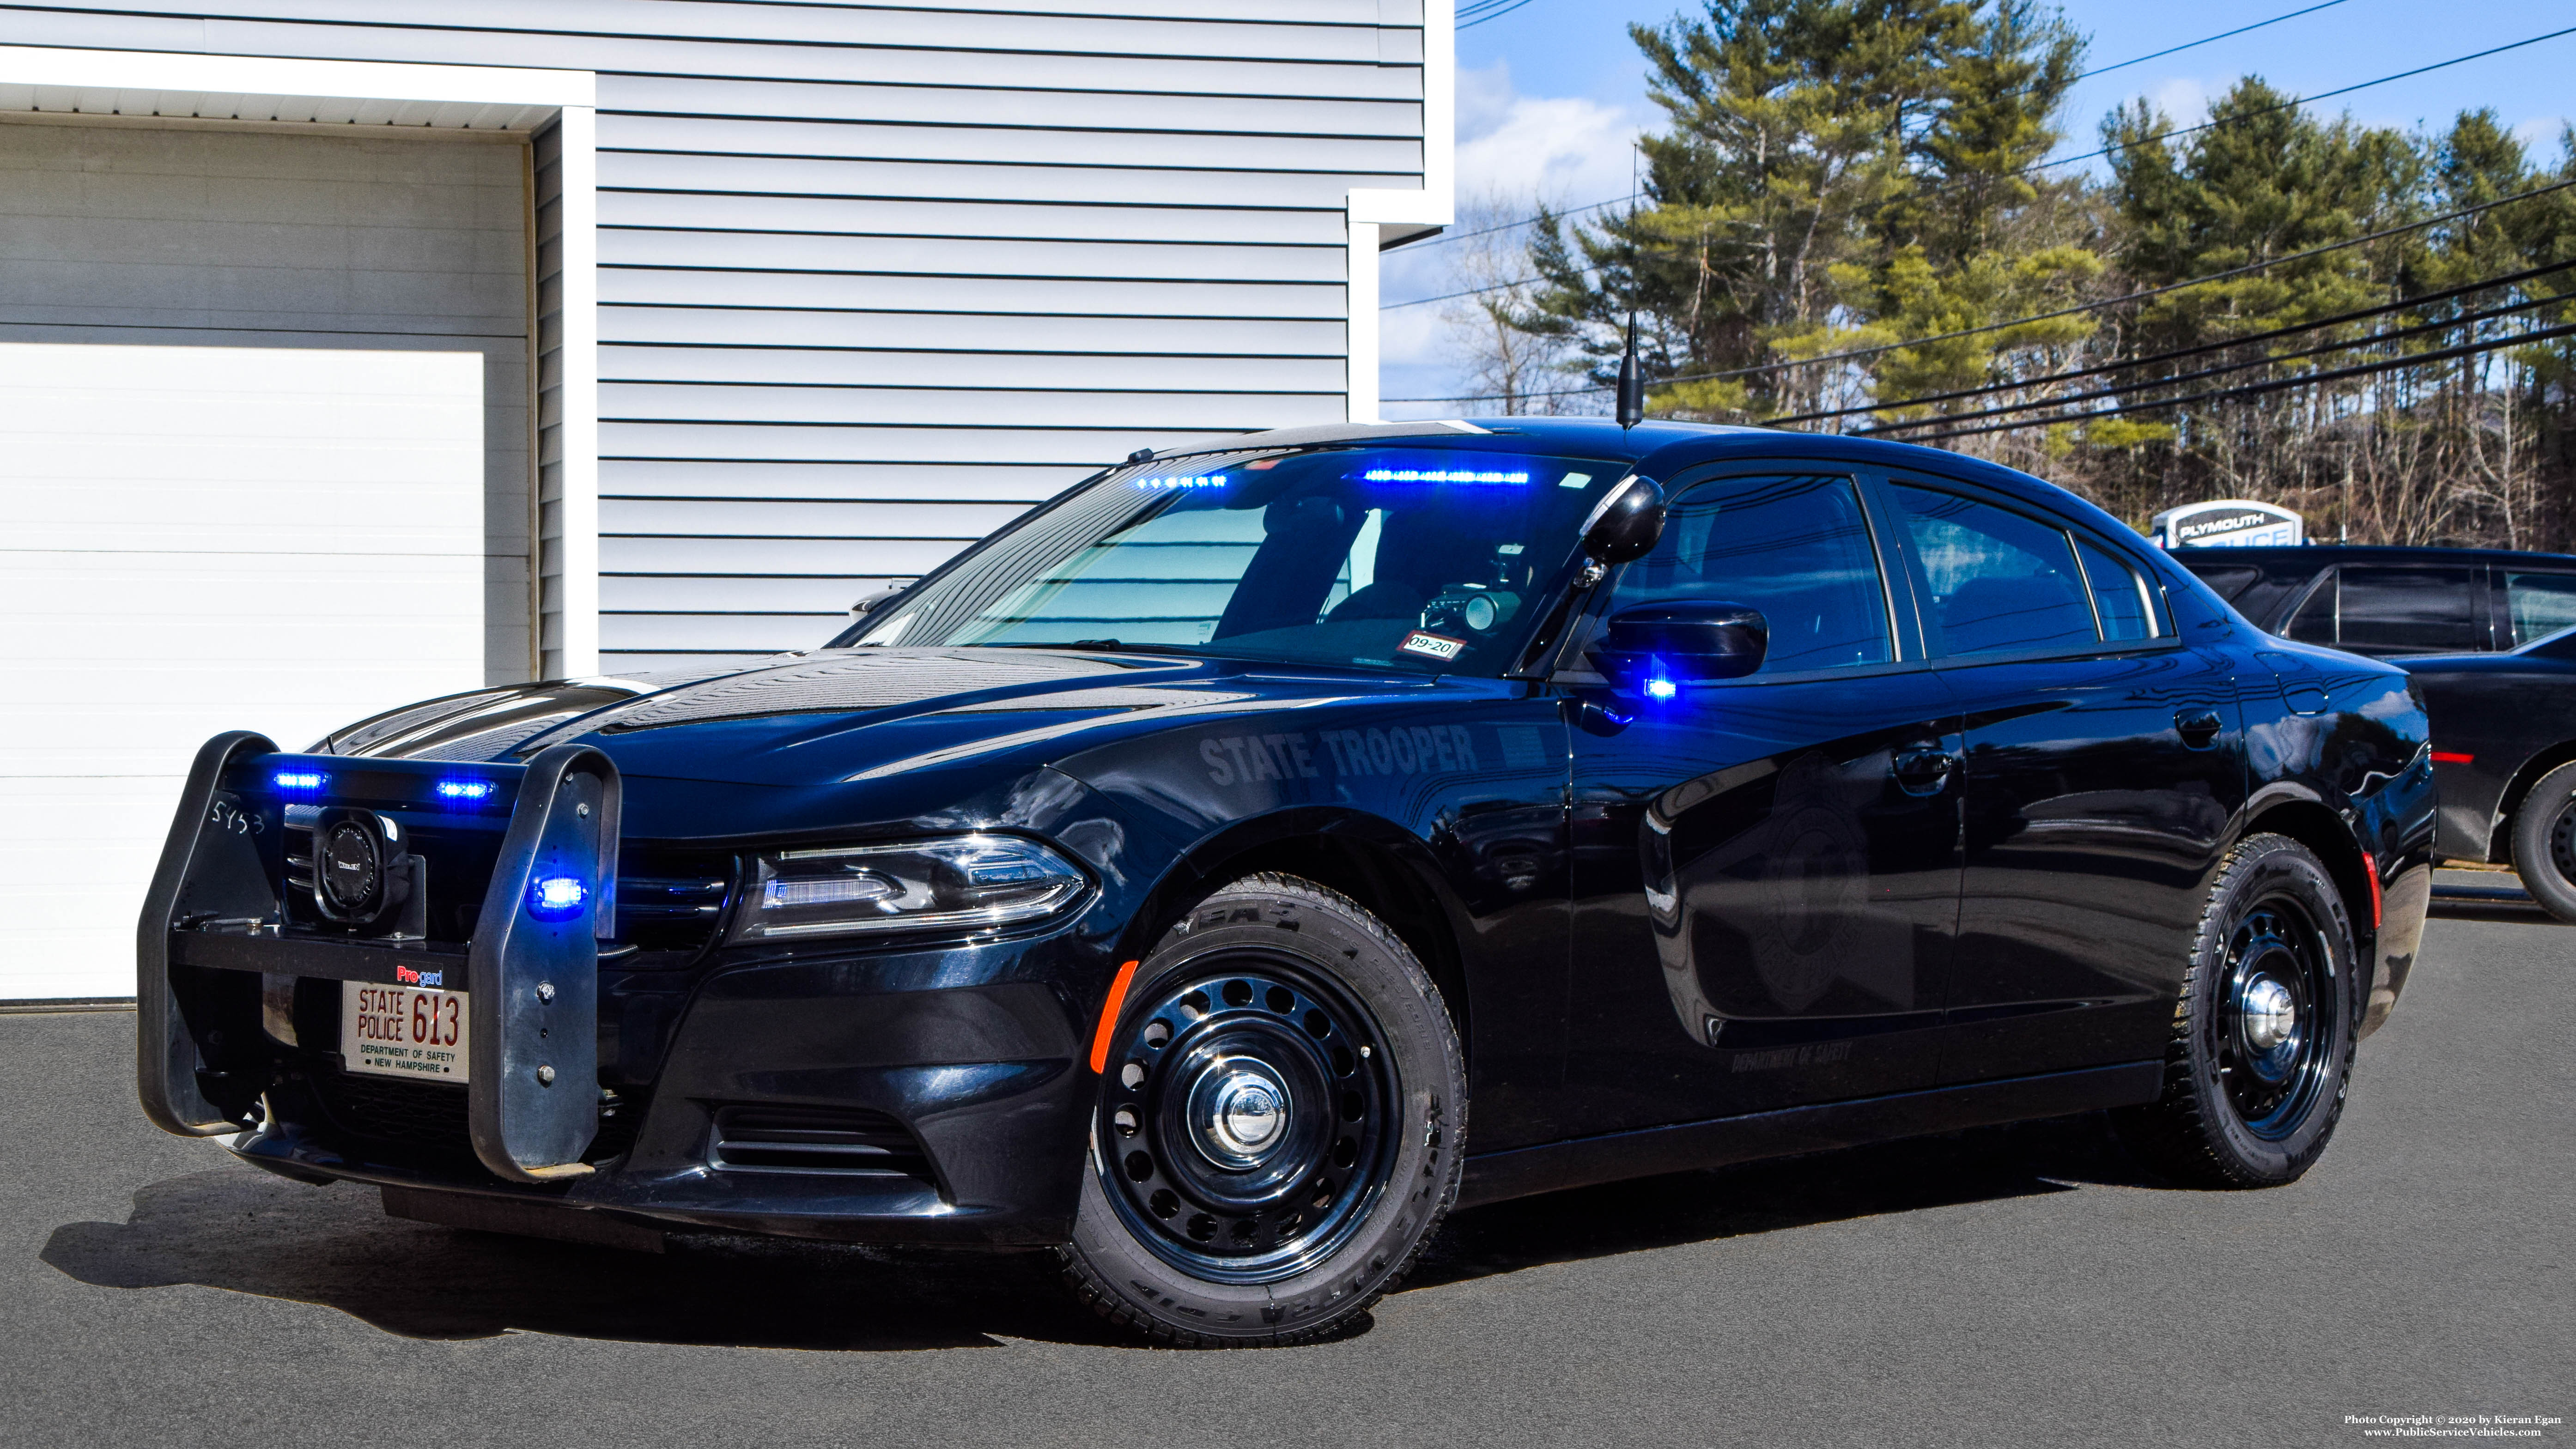 A photo  of New Hampshire State Police
            Cruiser 613, a 2019 Dodge Charger             taken by Kieran Egan